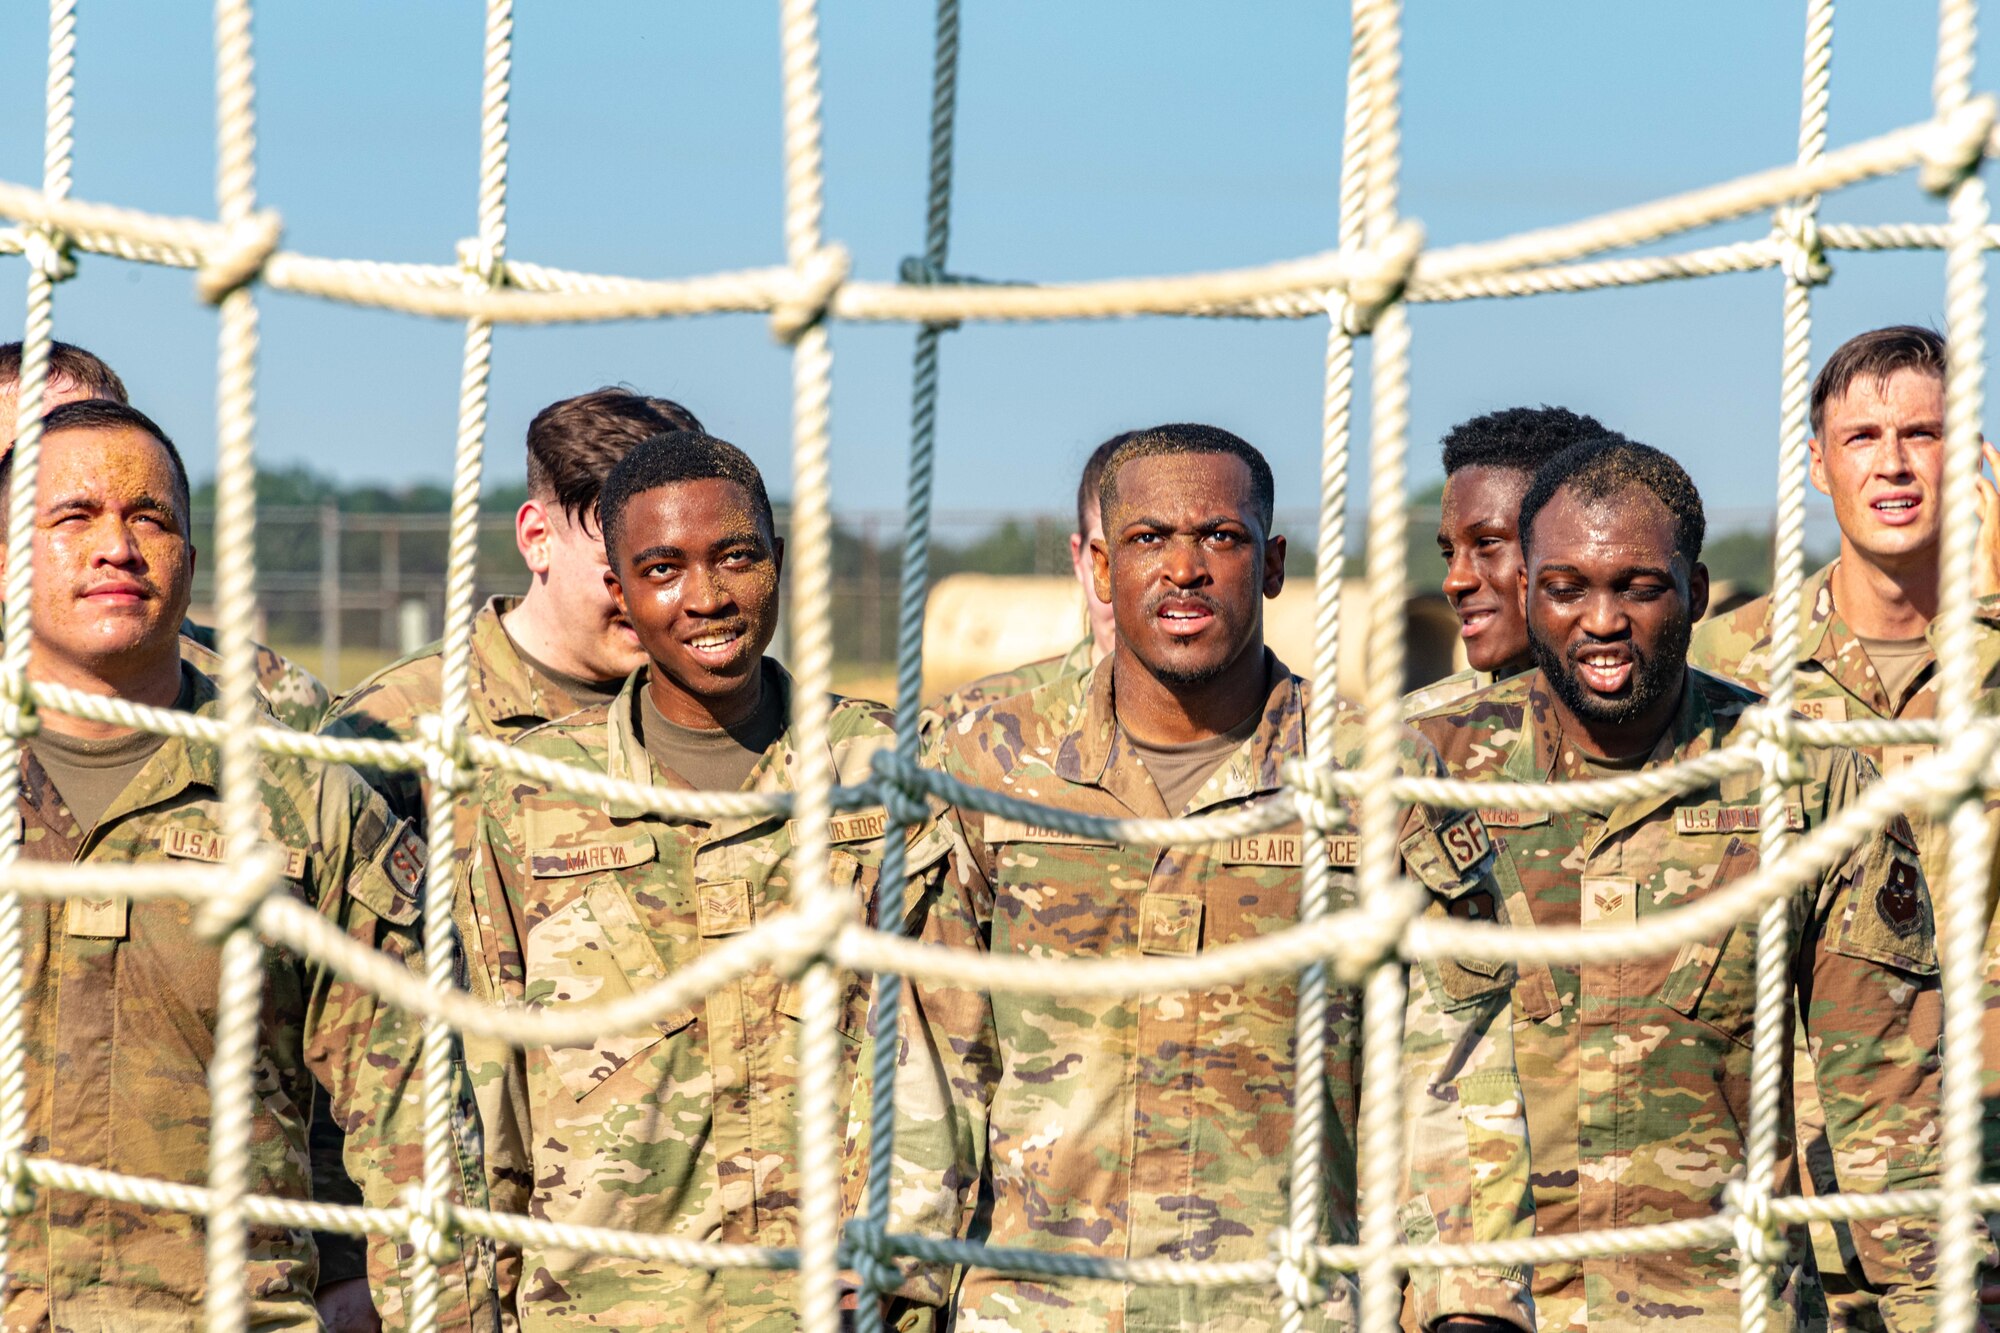 The Airmen were challenged on an obstacle course